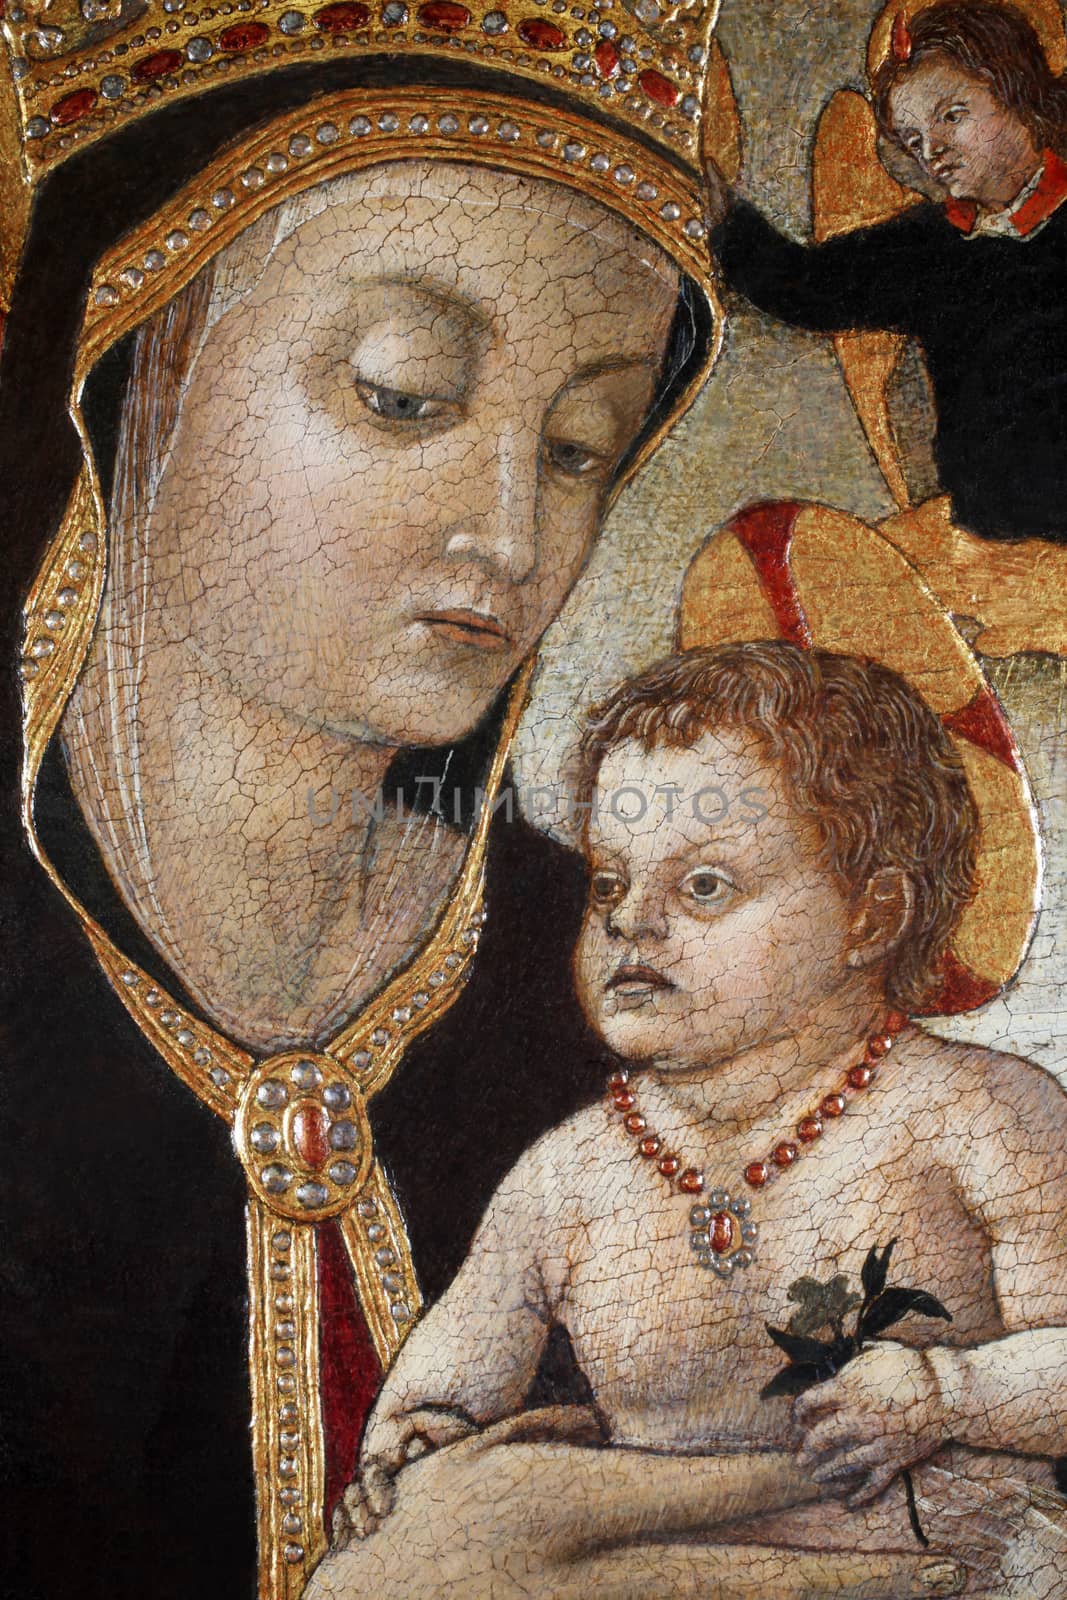 Vittore Crivelli: Madonna with Child, exhibited at the Great Masters Renaissance in Croatia, opened December 12, 2011. in Zagreb, Croatia